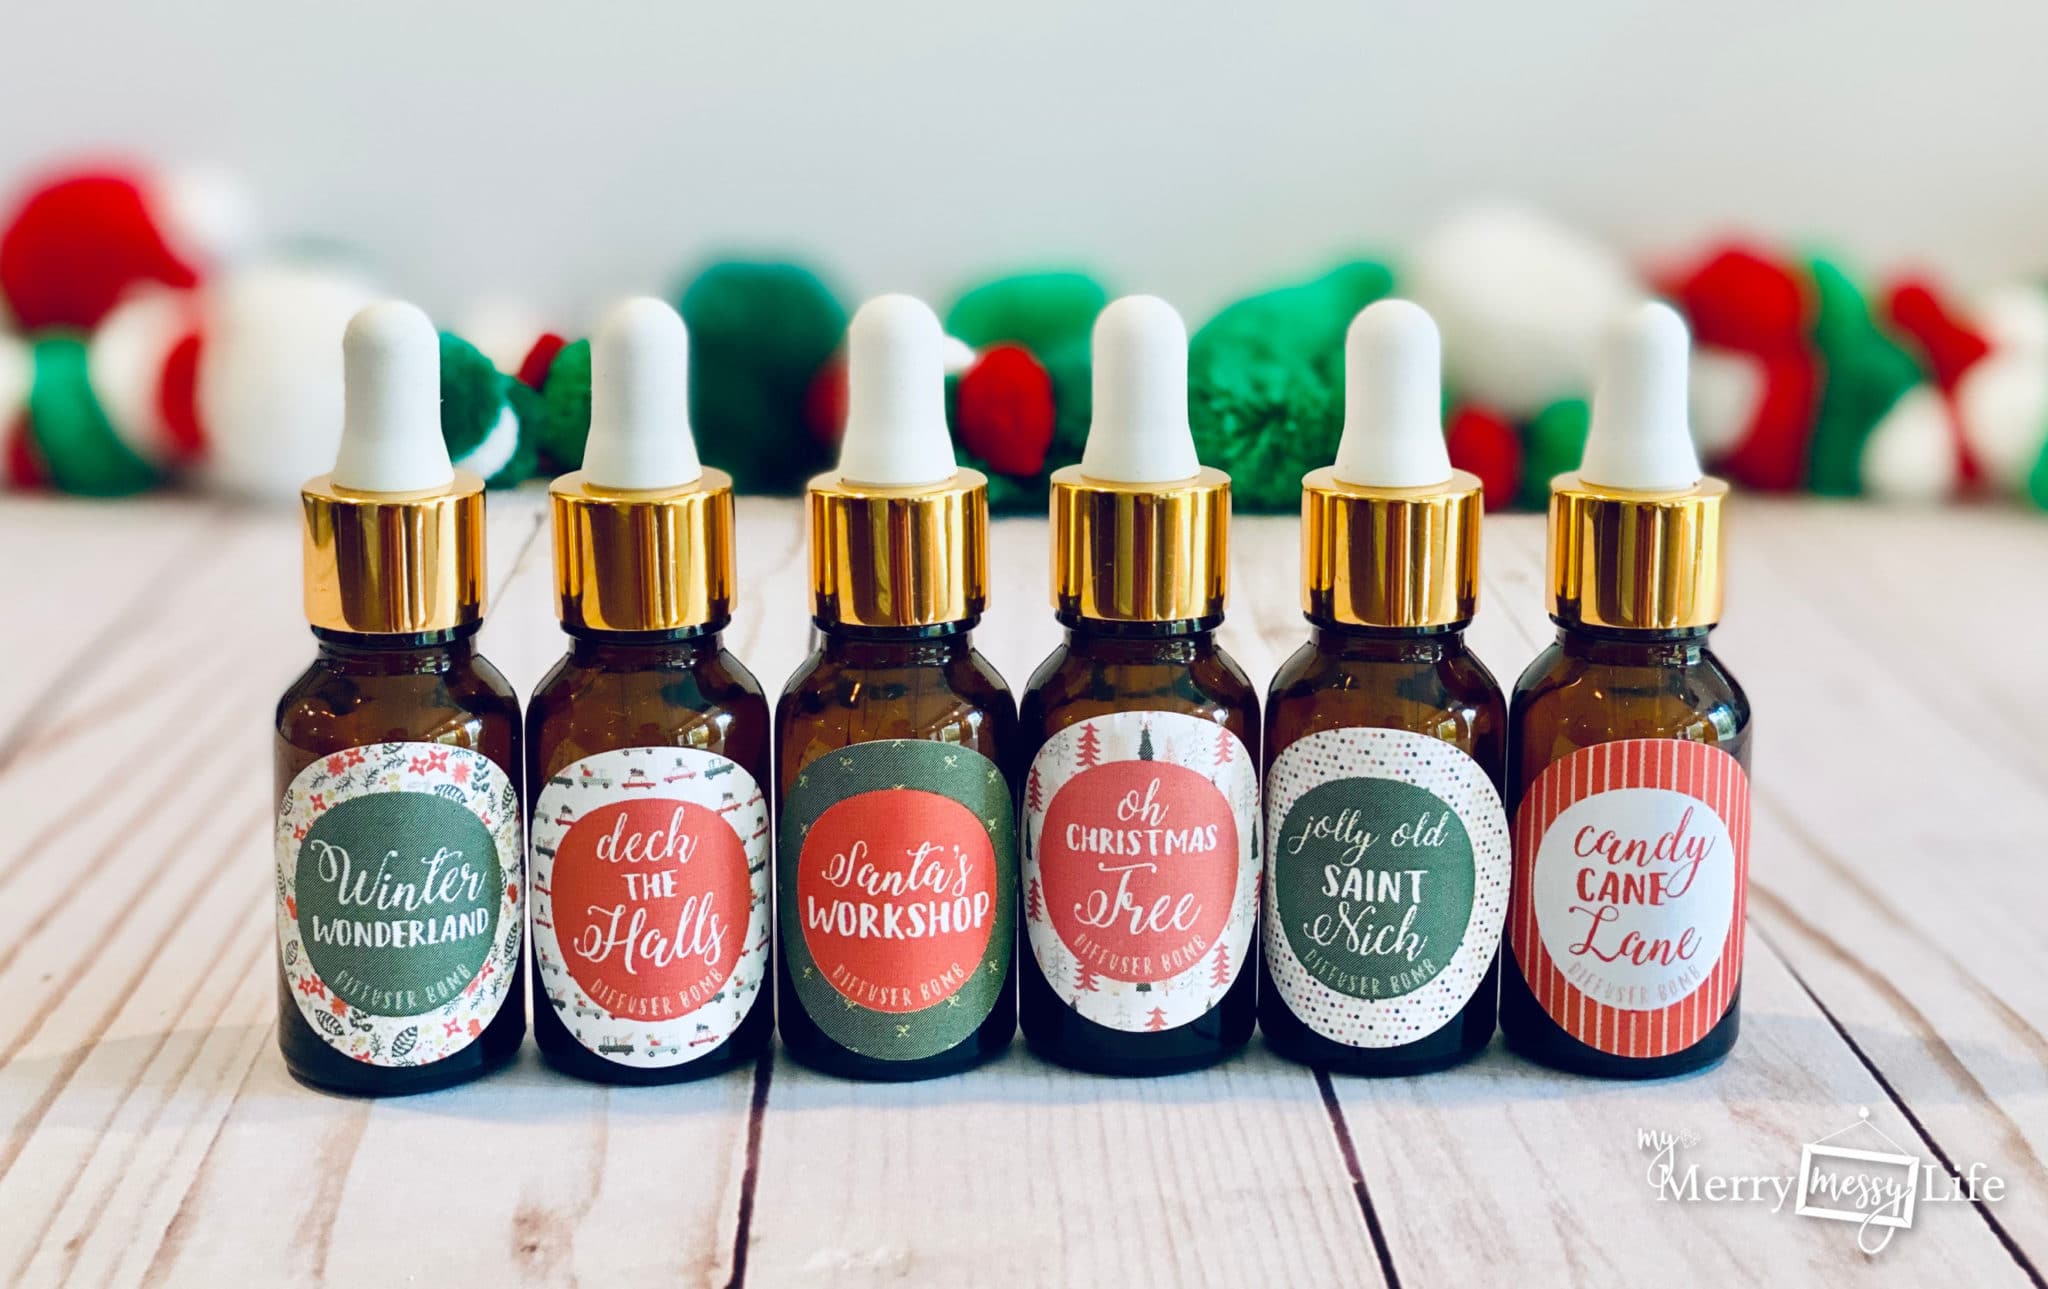 6 Holiday Room Spray Recipes You're Going to LOVE! Great to make and use as gifts. Using essential oils like orange, clove, nutmeg, cinnamon and Frankincense